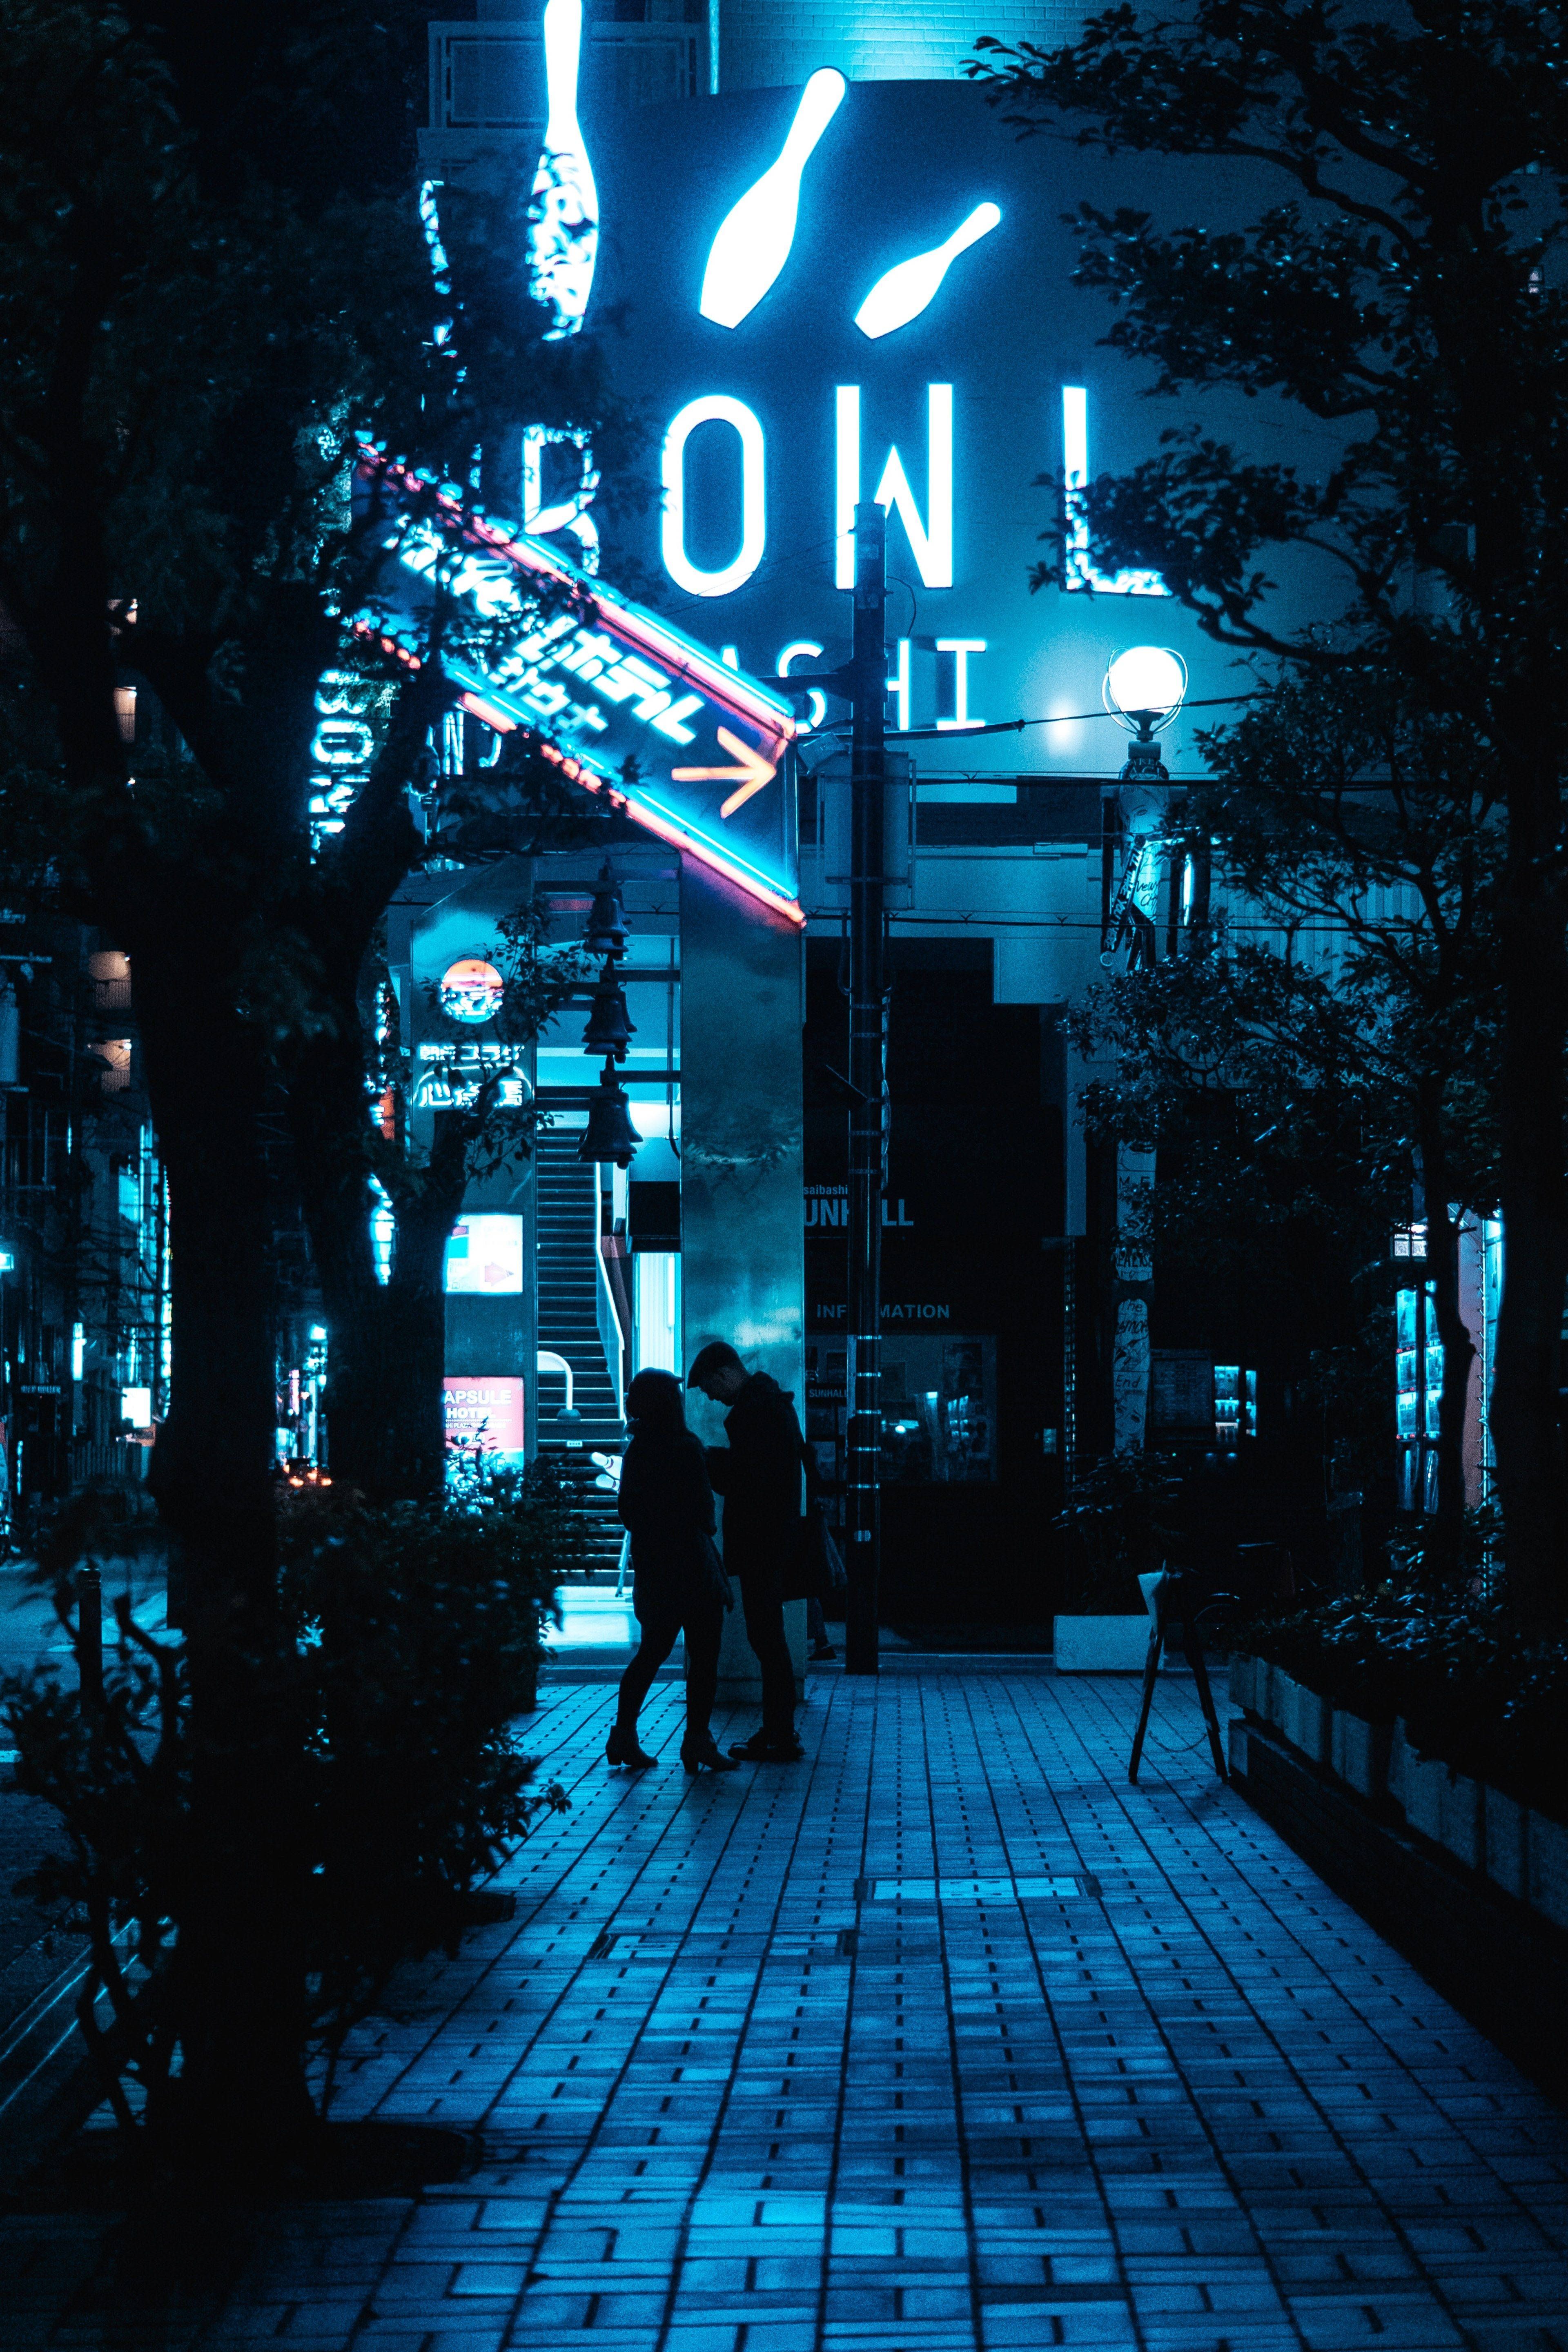 A couple walking down a street at night with neon signs in the background. - Navy blue, neon blue, dark blue, city